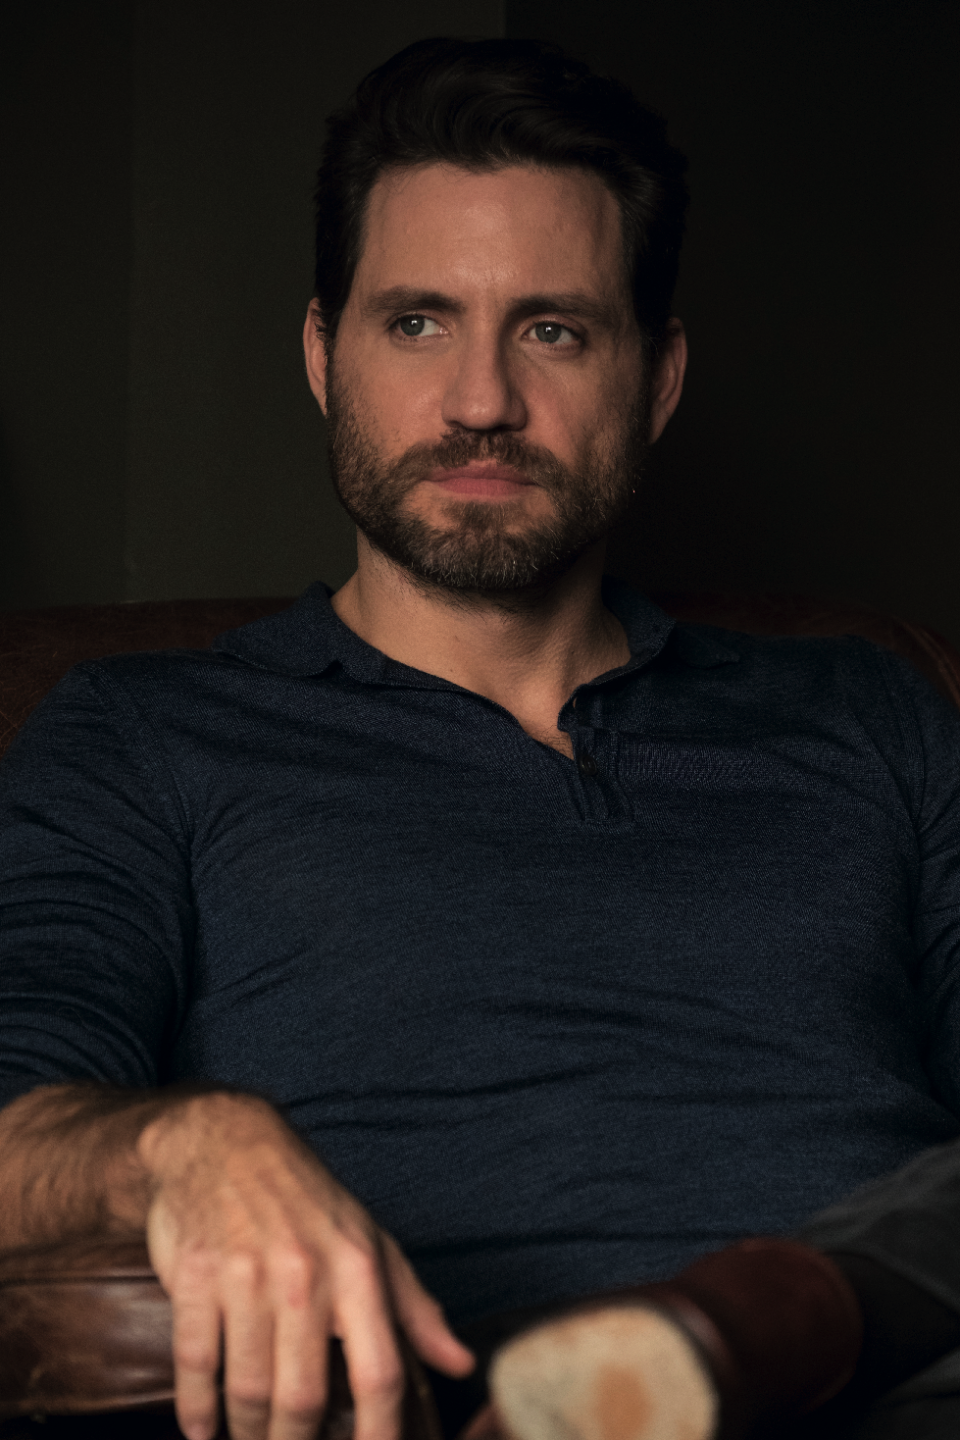 Edgar Ramirez as Dr. Kamal in “The Girl on the Train”. (United International Pictures)